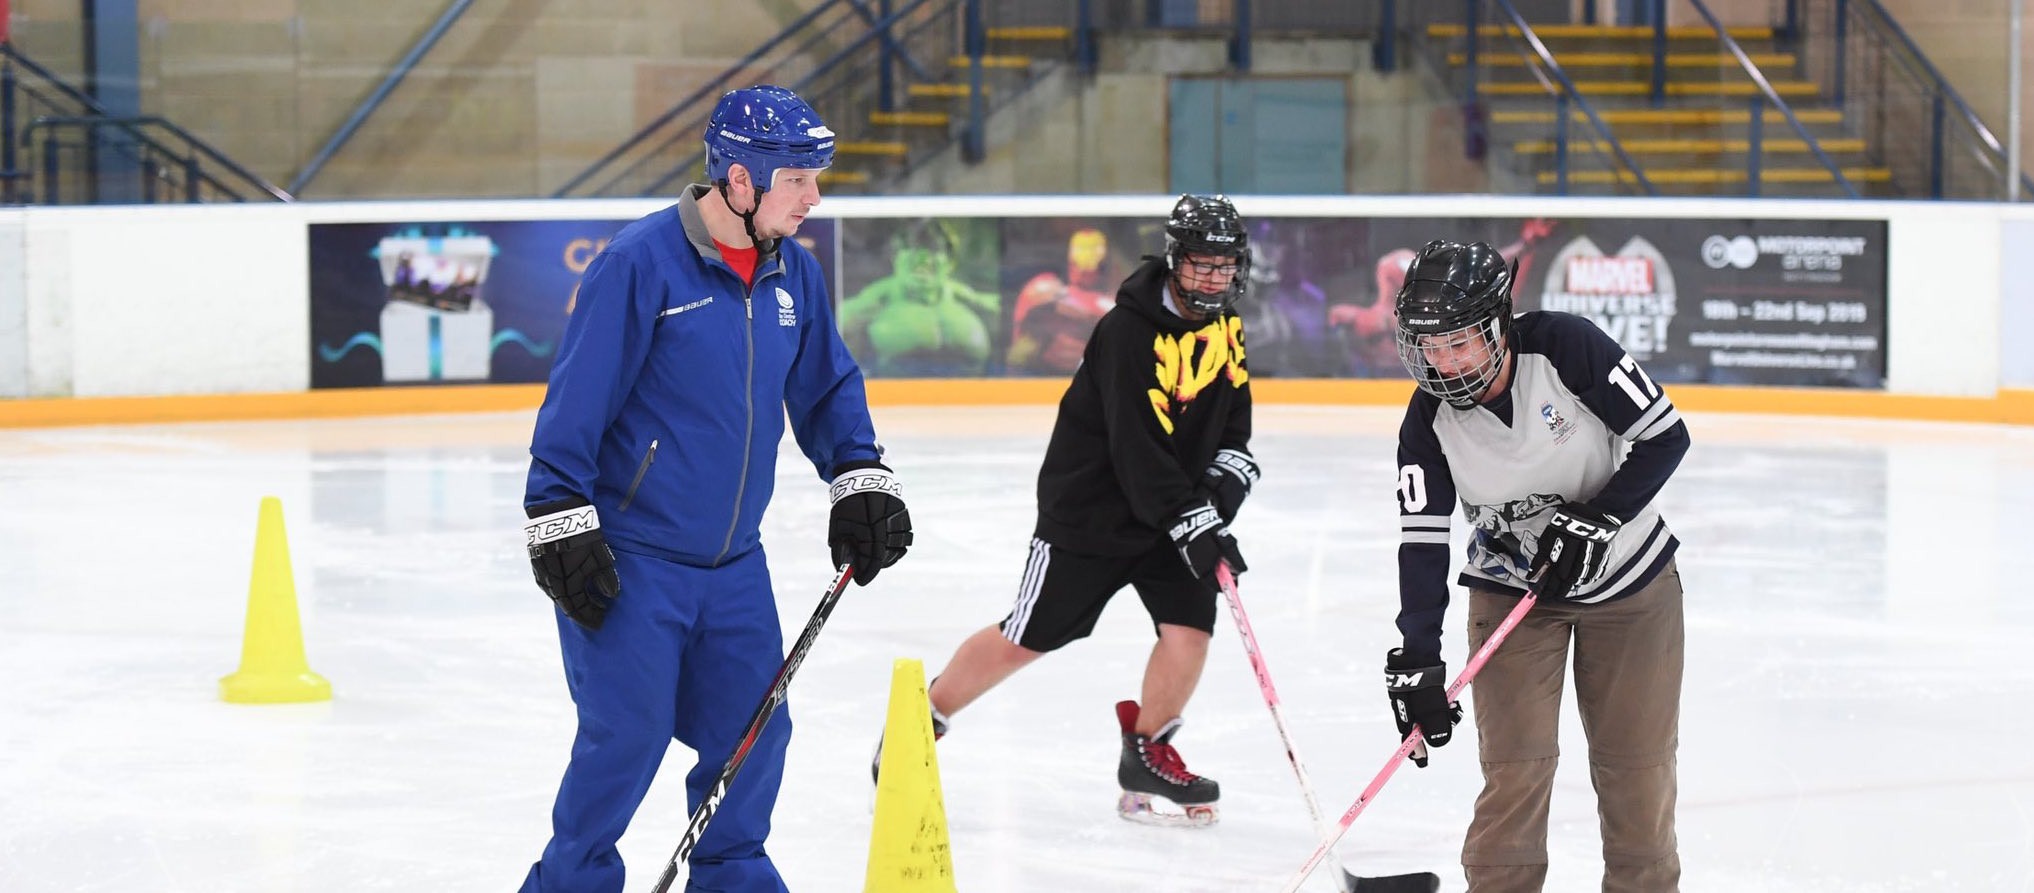 Team GB, Ice Hockey UK and Nottingham's National Ice Centre teamed up to offer a free ice hockey taster session ©Ice Hockey UK